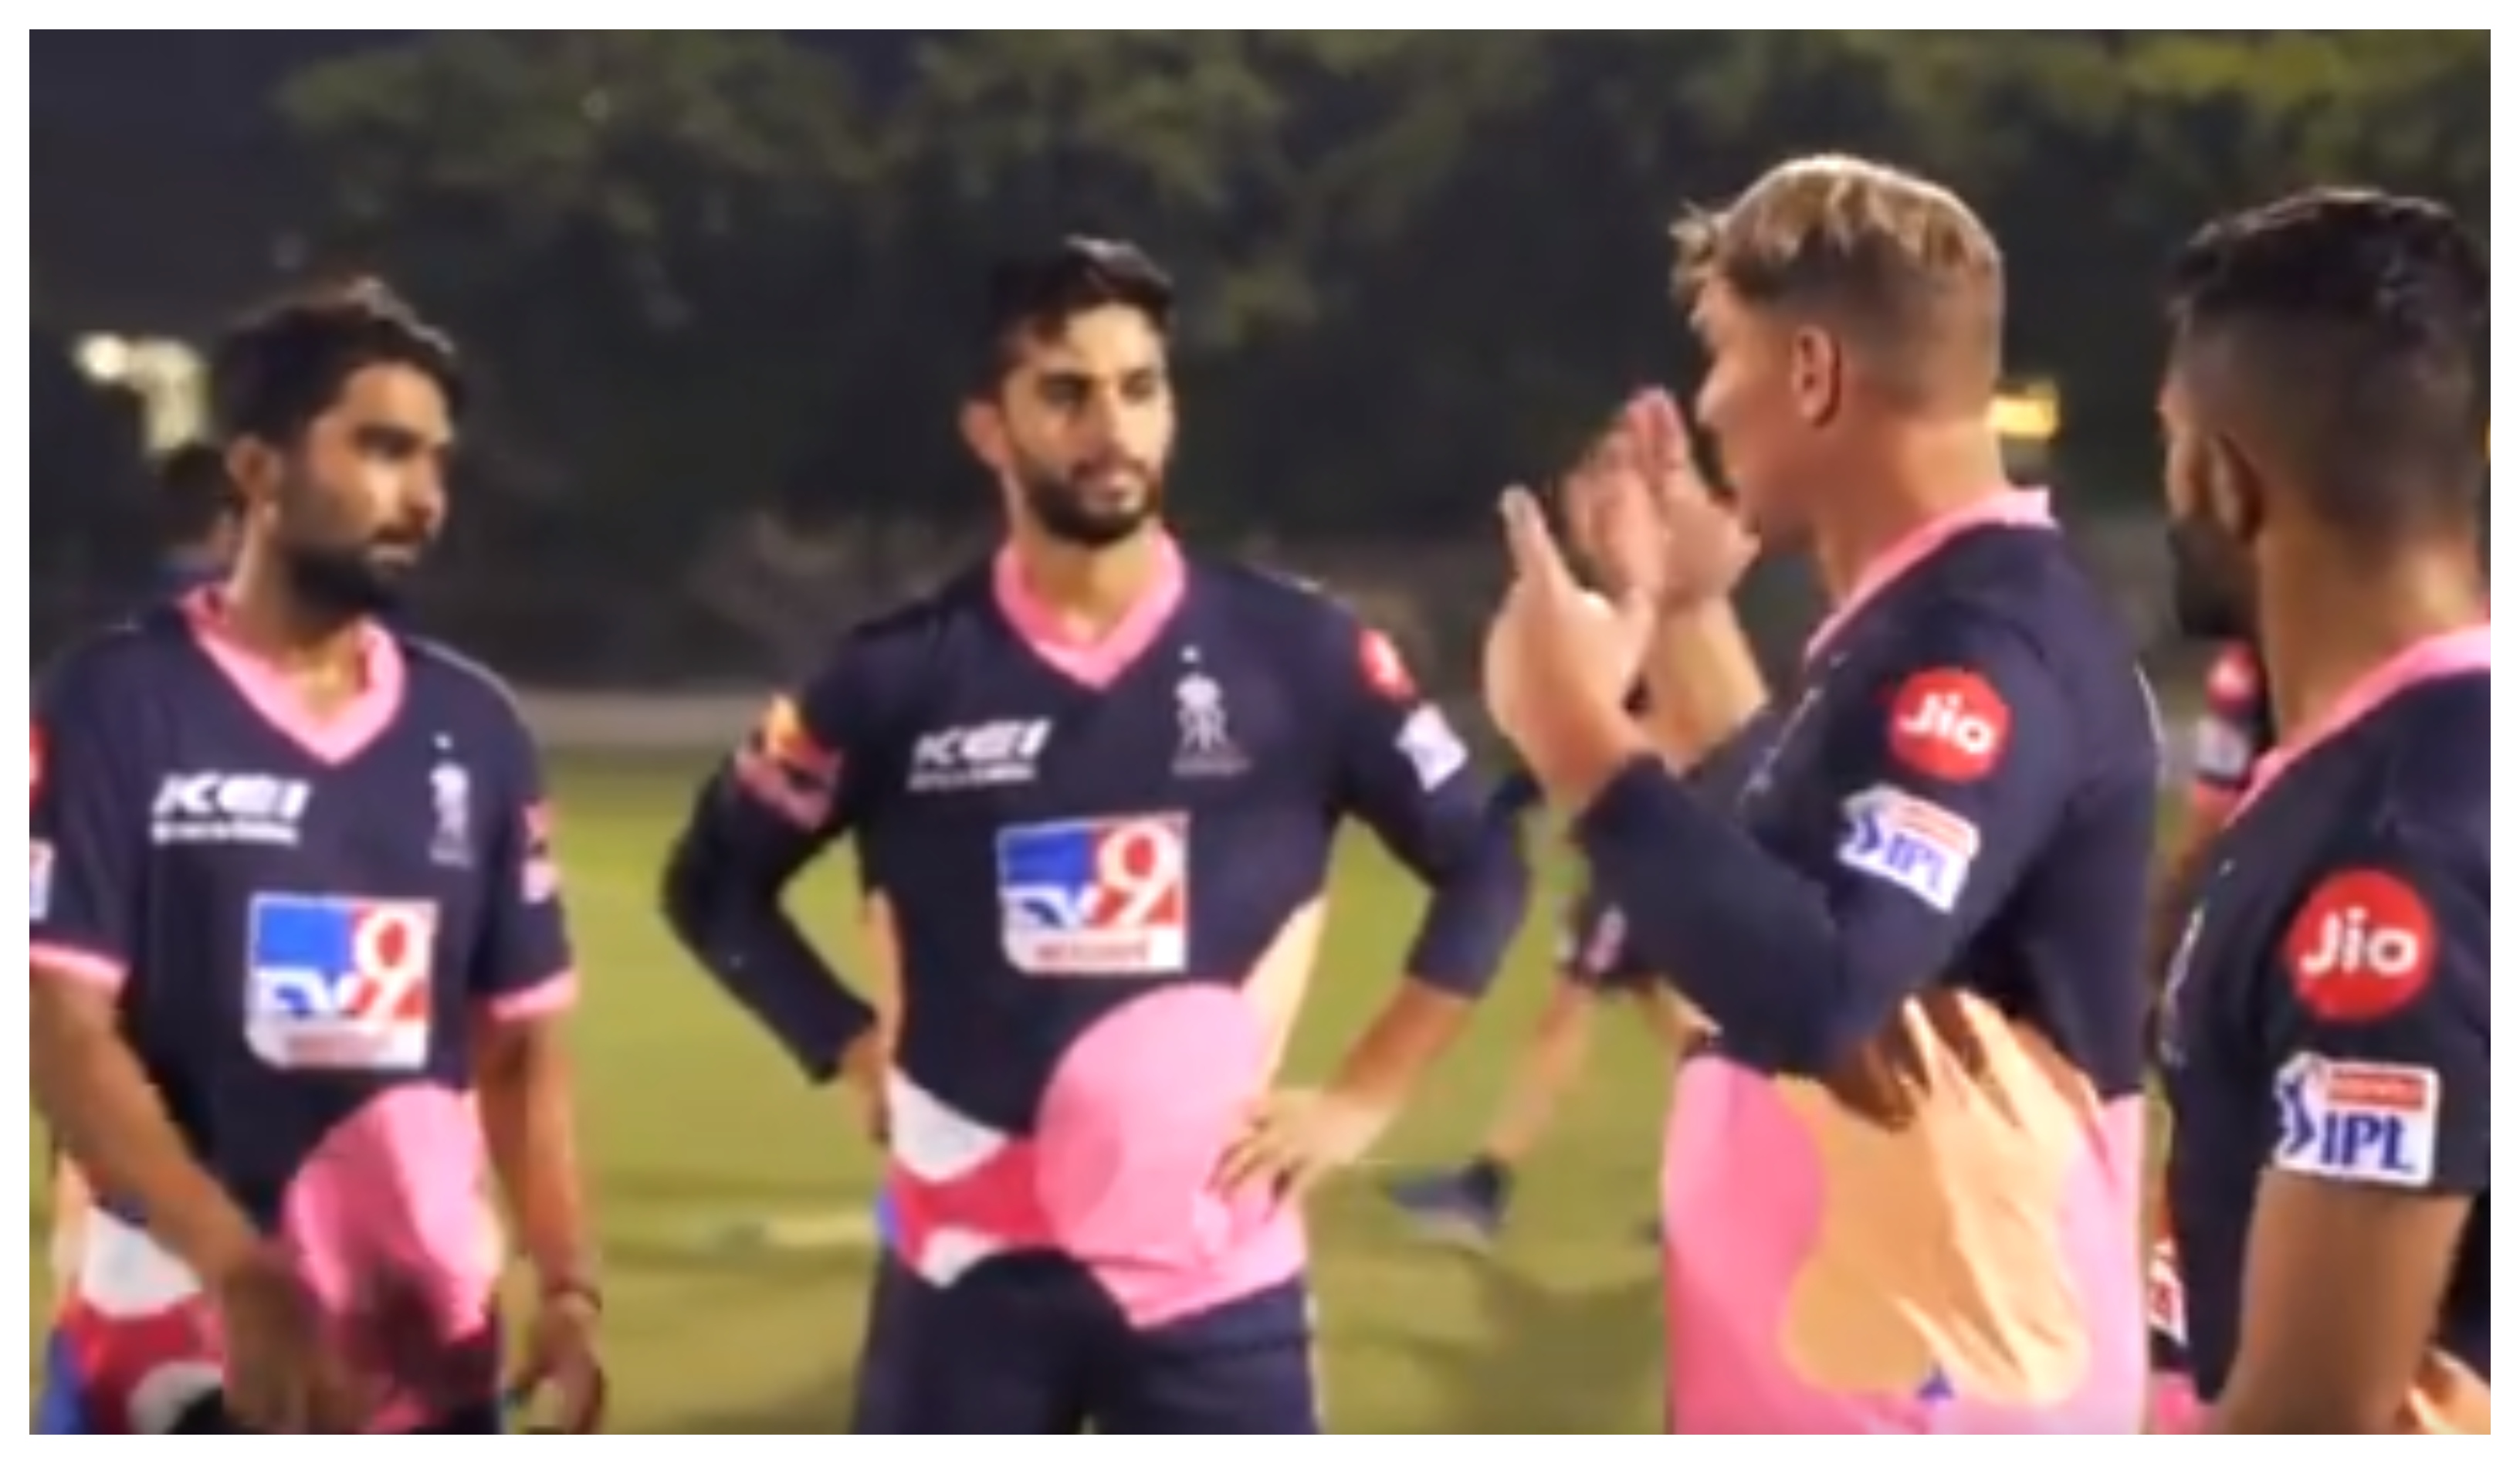 Shane Warner interacted with RR spinners during a net session | Screengrab